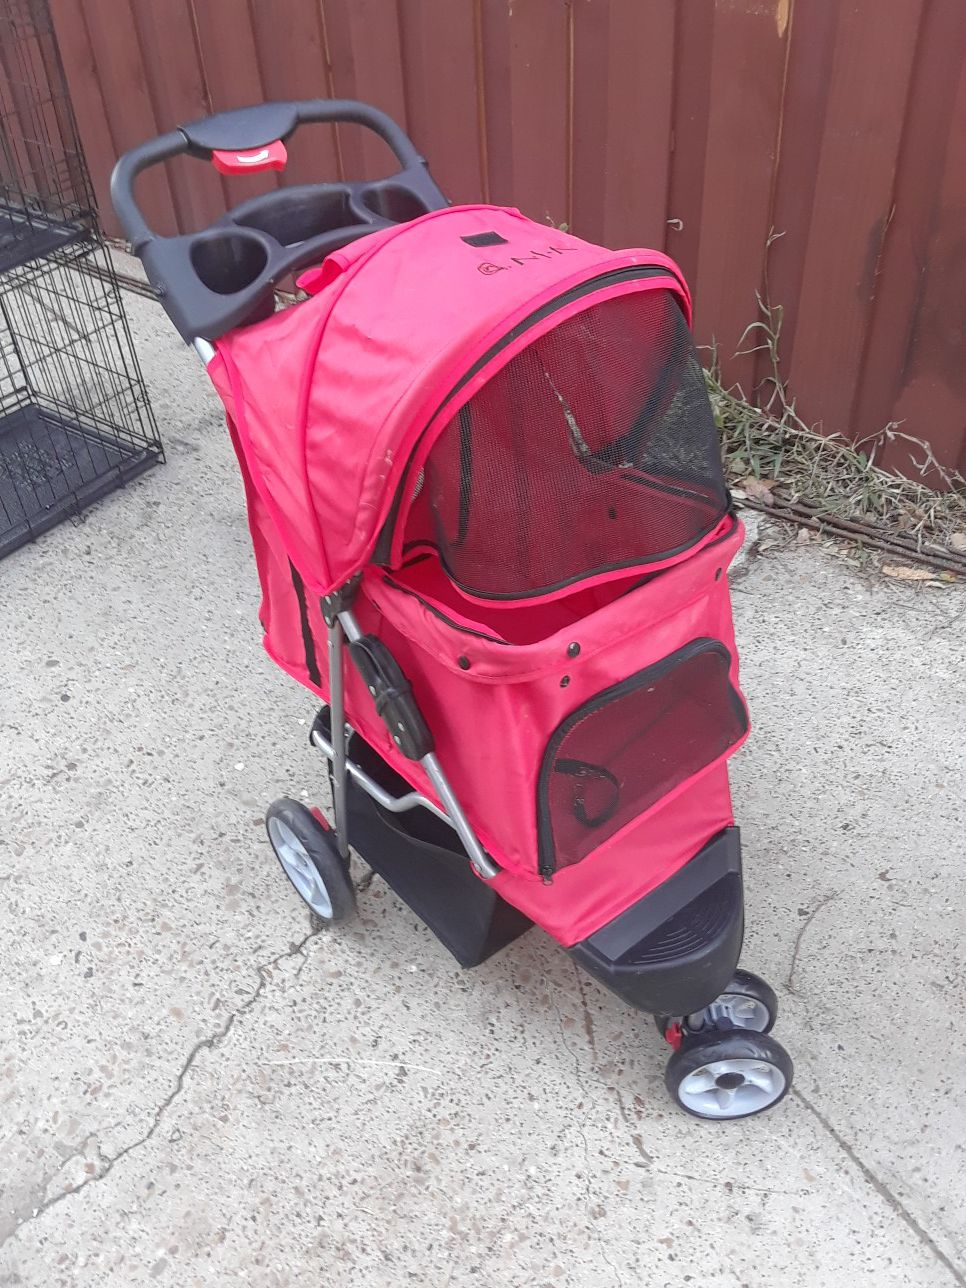 Awesome New Red Dog Stroller $40.00 cash only